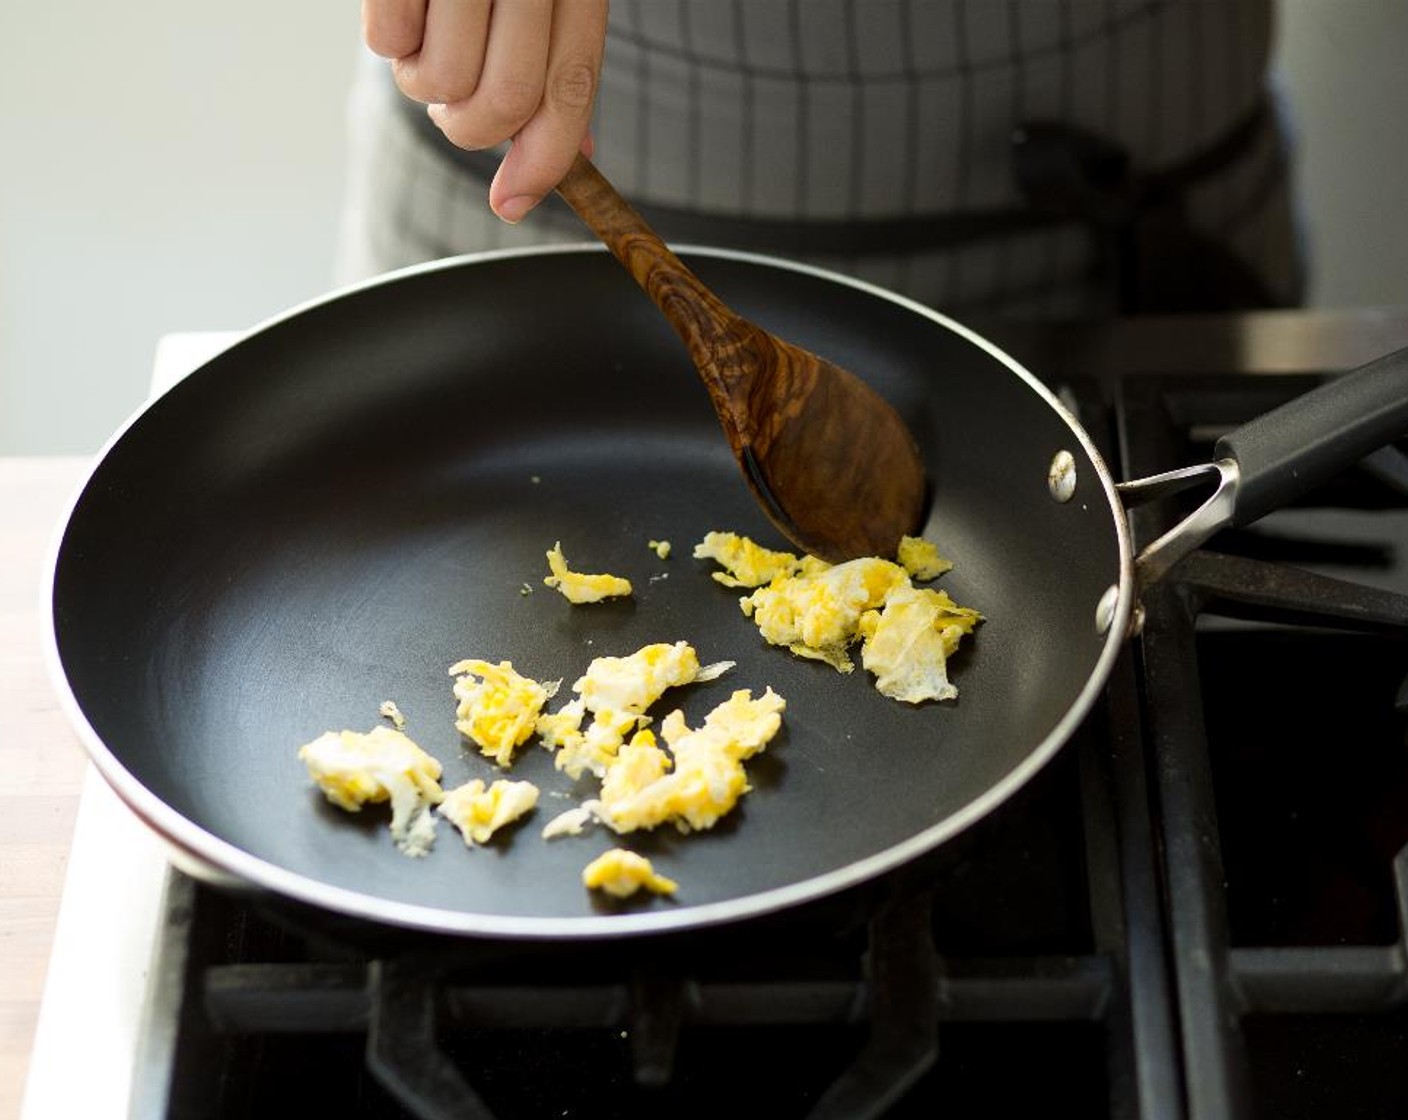 step 9 Heat Canola Oil (1 Tbsp) in a large non-stick sauté pan or wok over medium-high heat. Cook the egg first and stir to scramble. When done, transfer the egg to a plate; set aside.